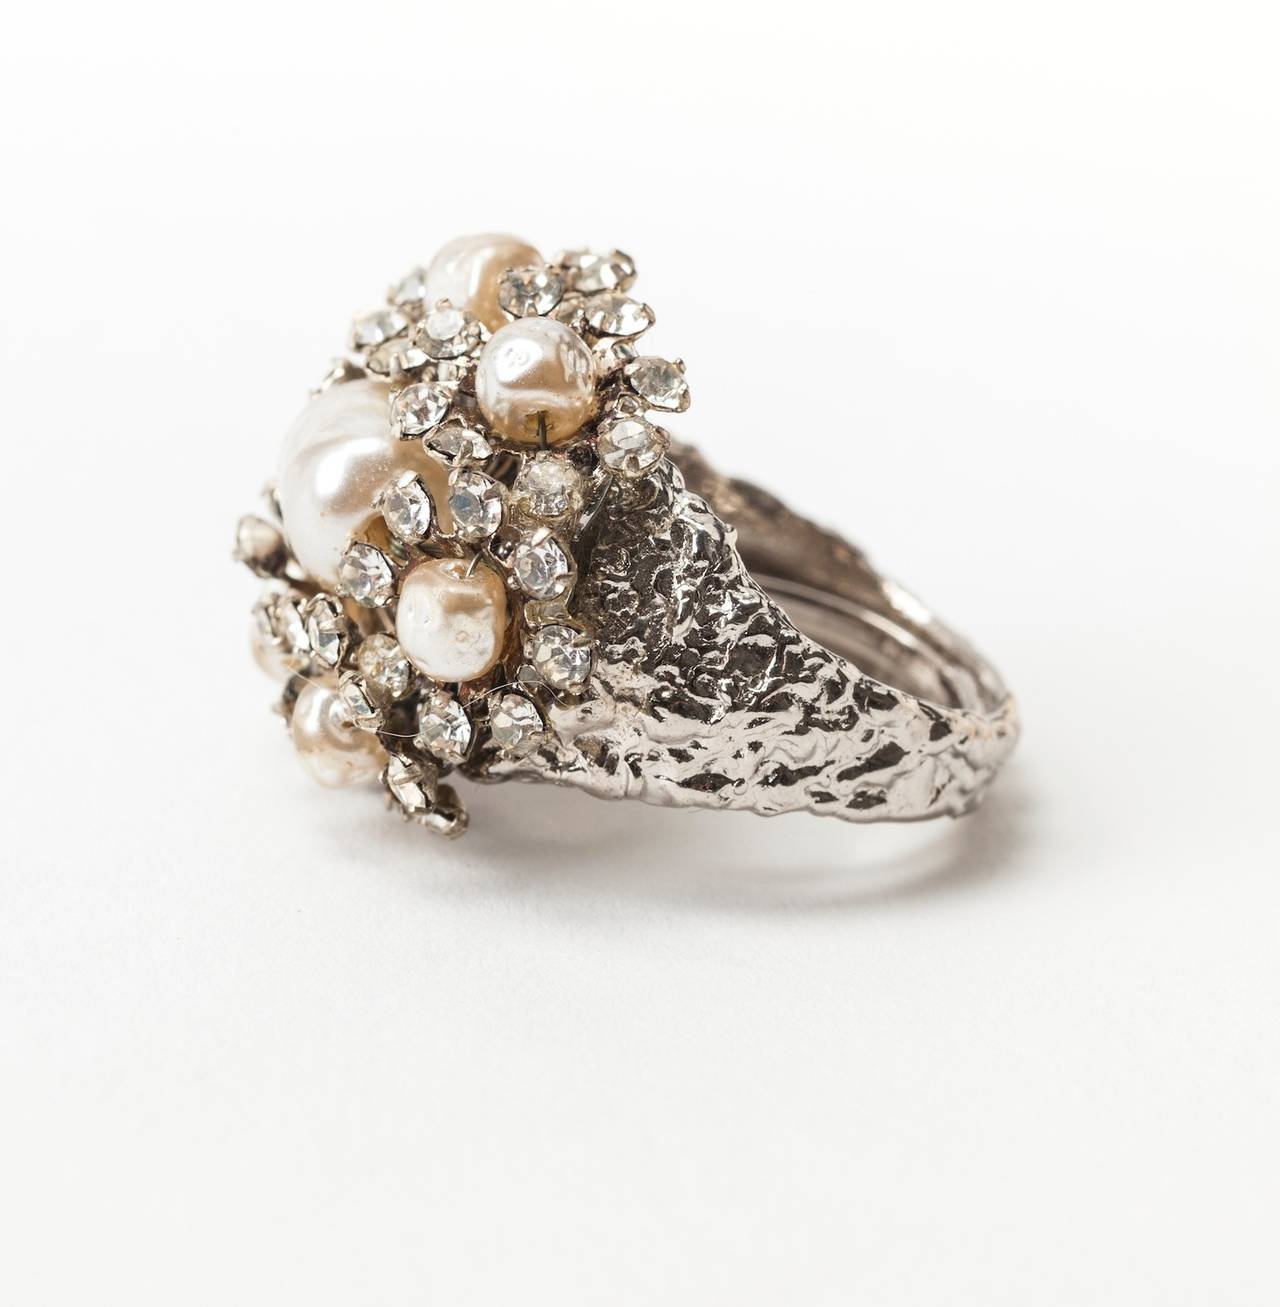 Miriam Haskell silver gilt and faux pearl and pave cluster ring. 1950's USA.
Adjustable band. Excellent condition.